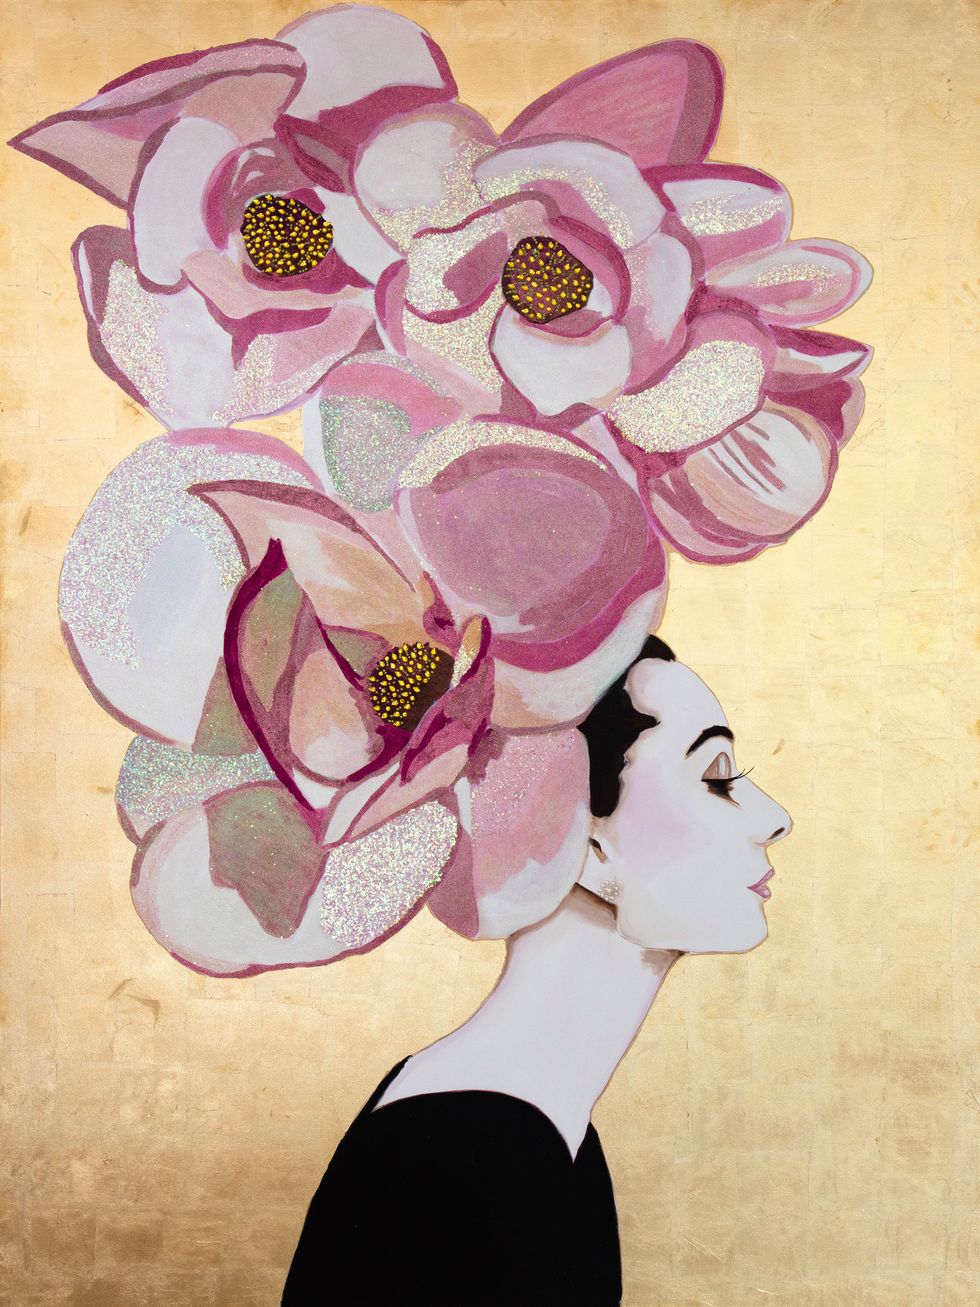 Audrey with Japanese Magnolia with Gold Leaf